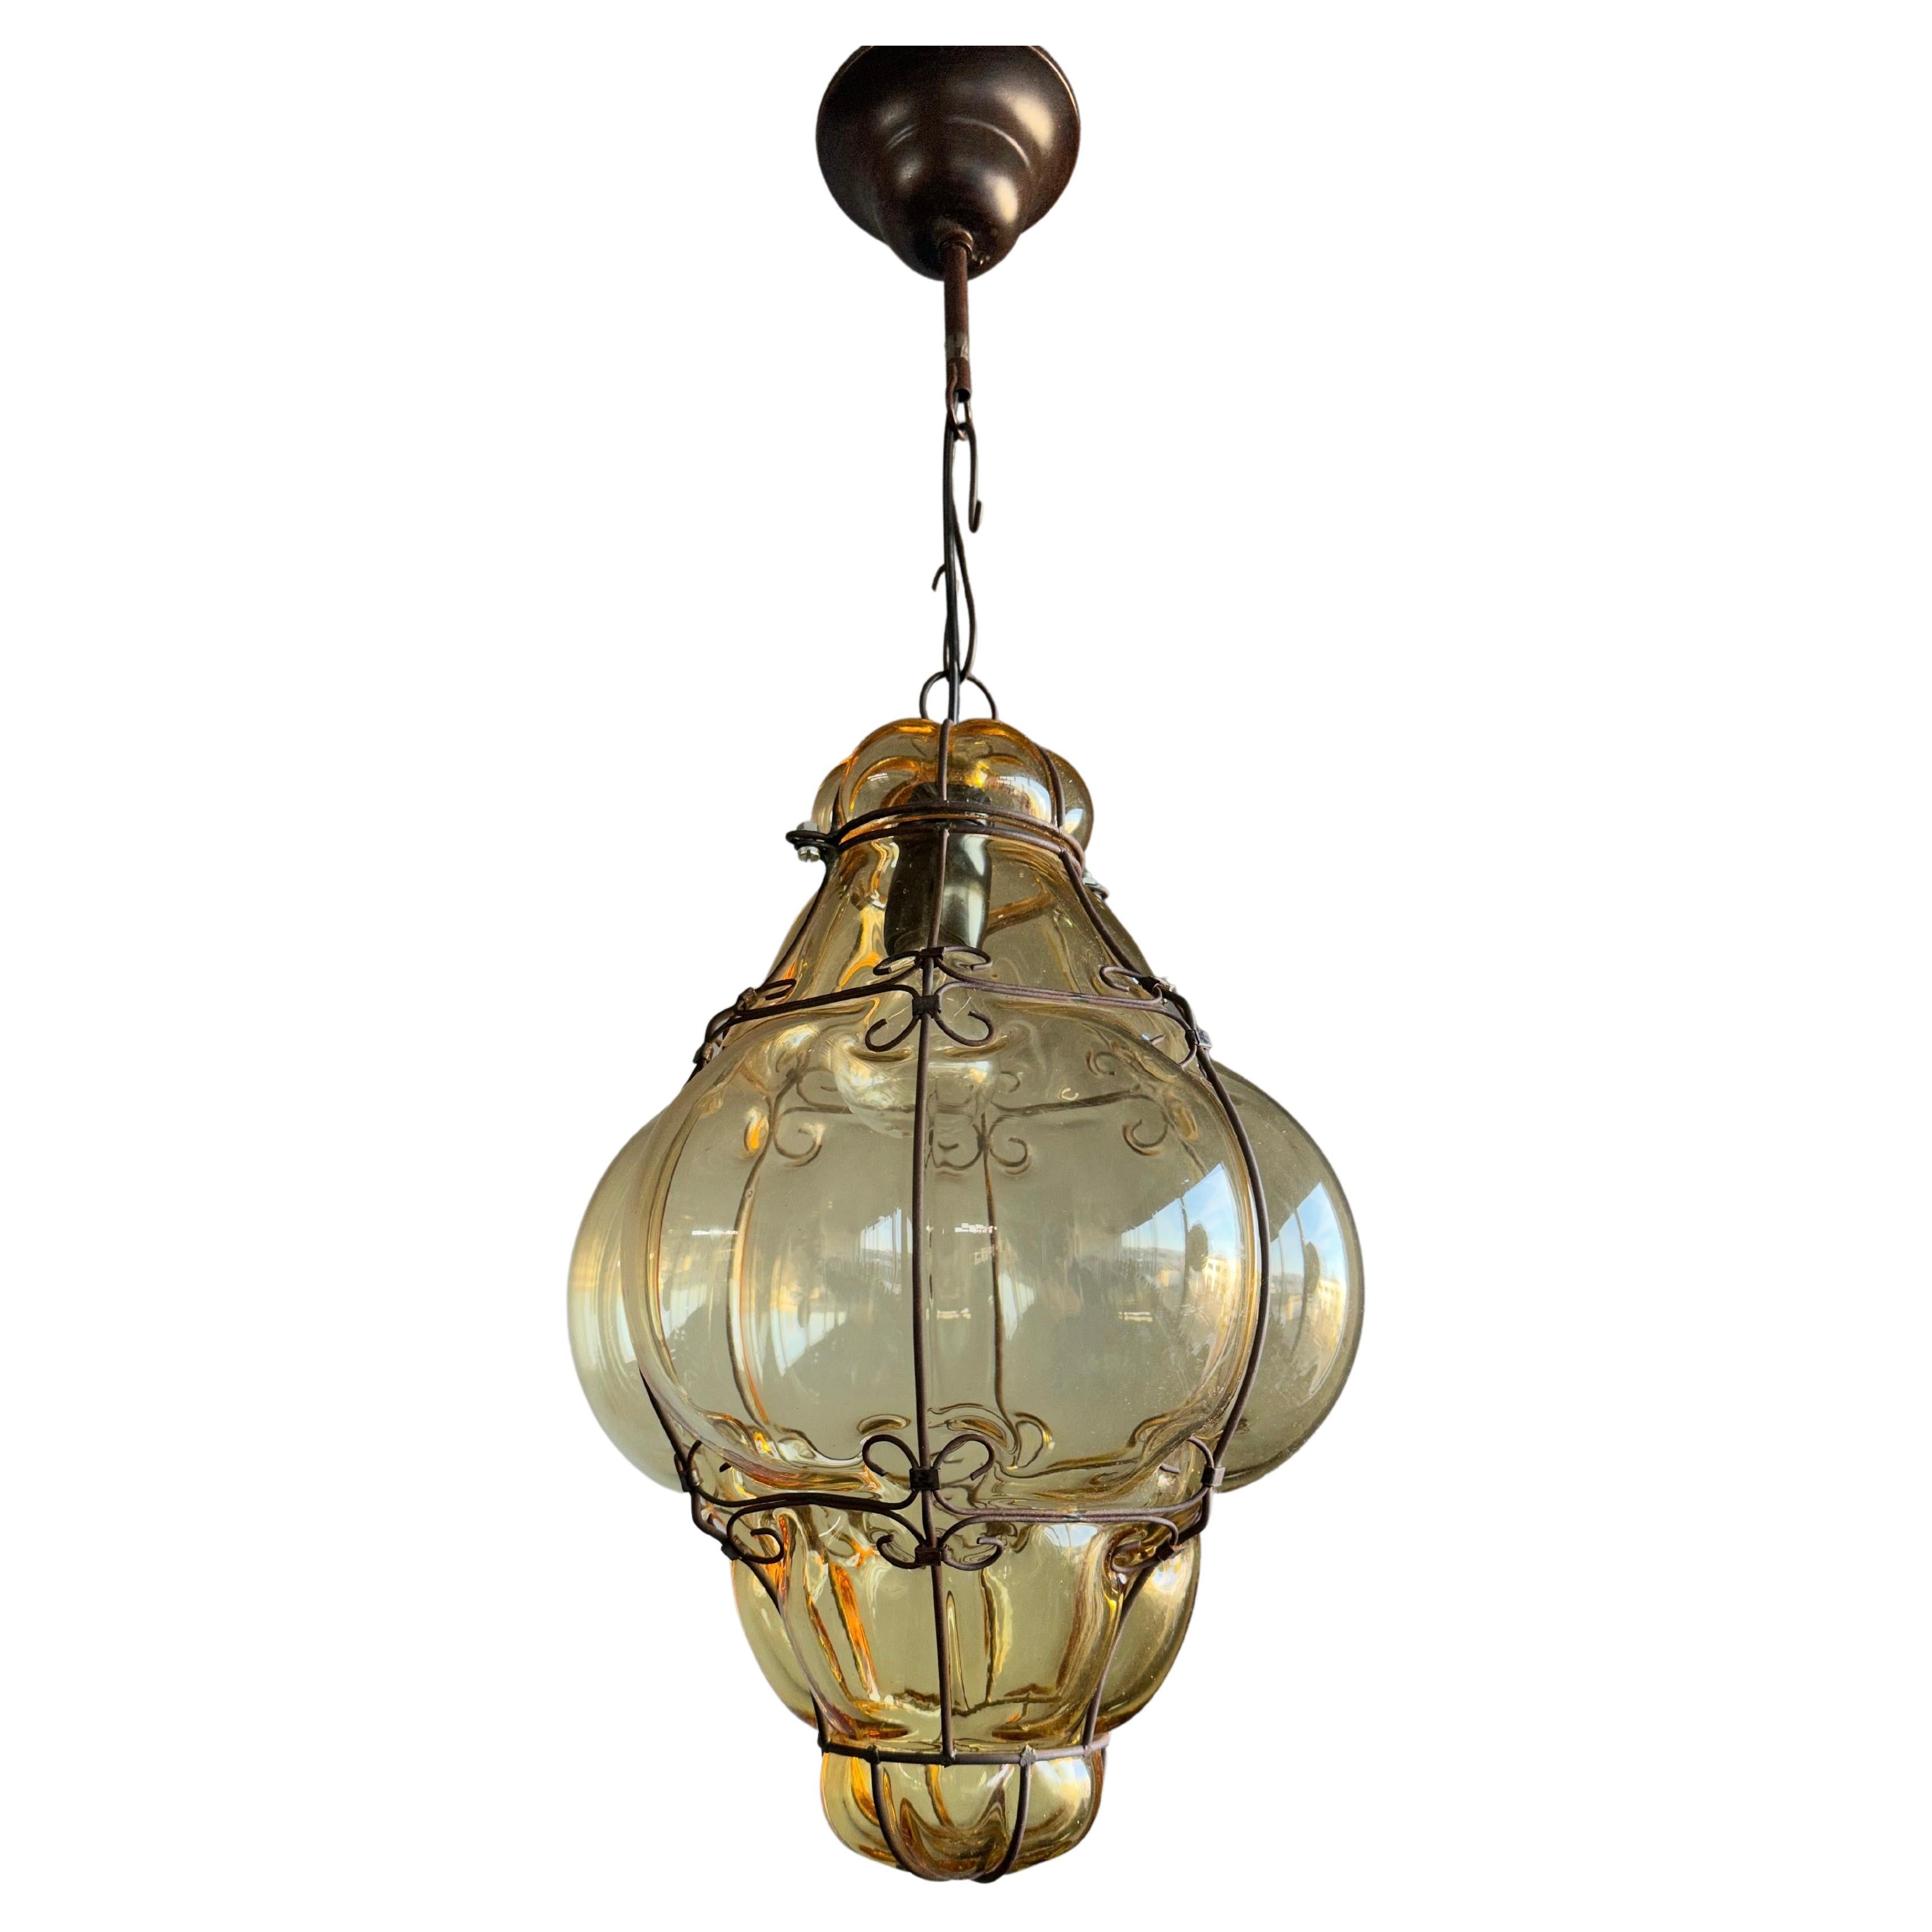 Antique Venetian Murano Pendant Light, Mouth Blown Smoked Glass in iron Frame